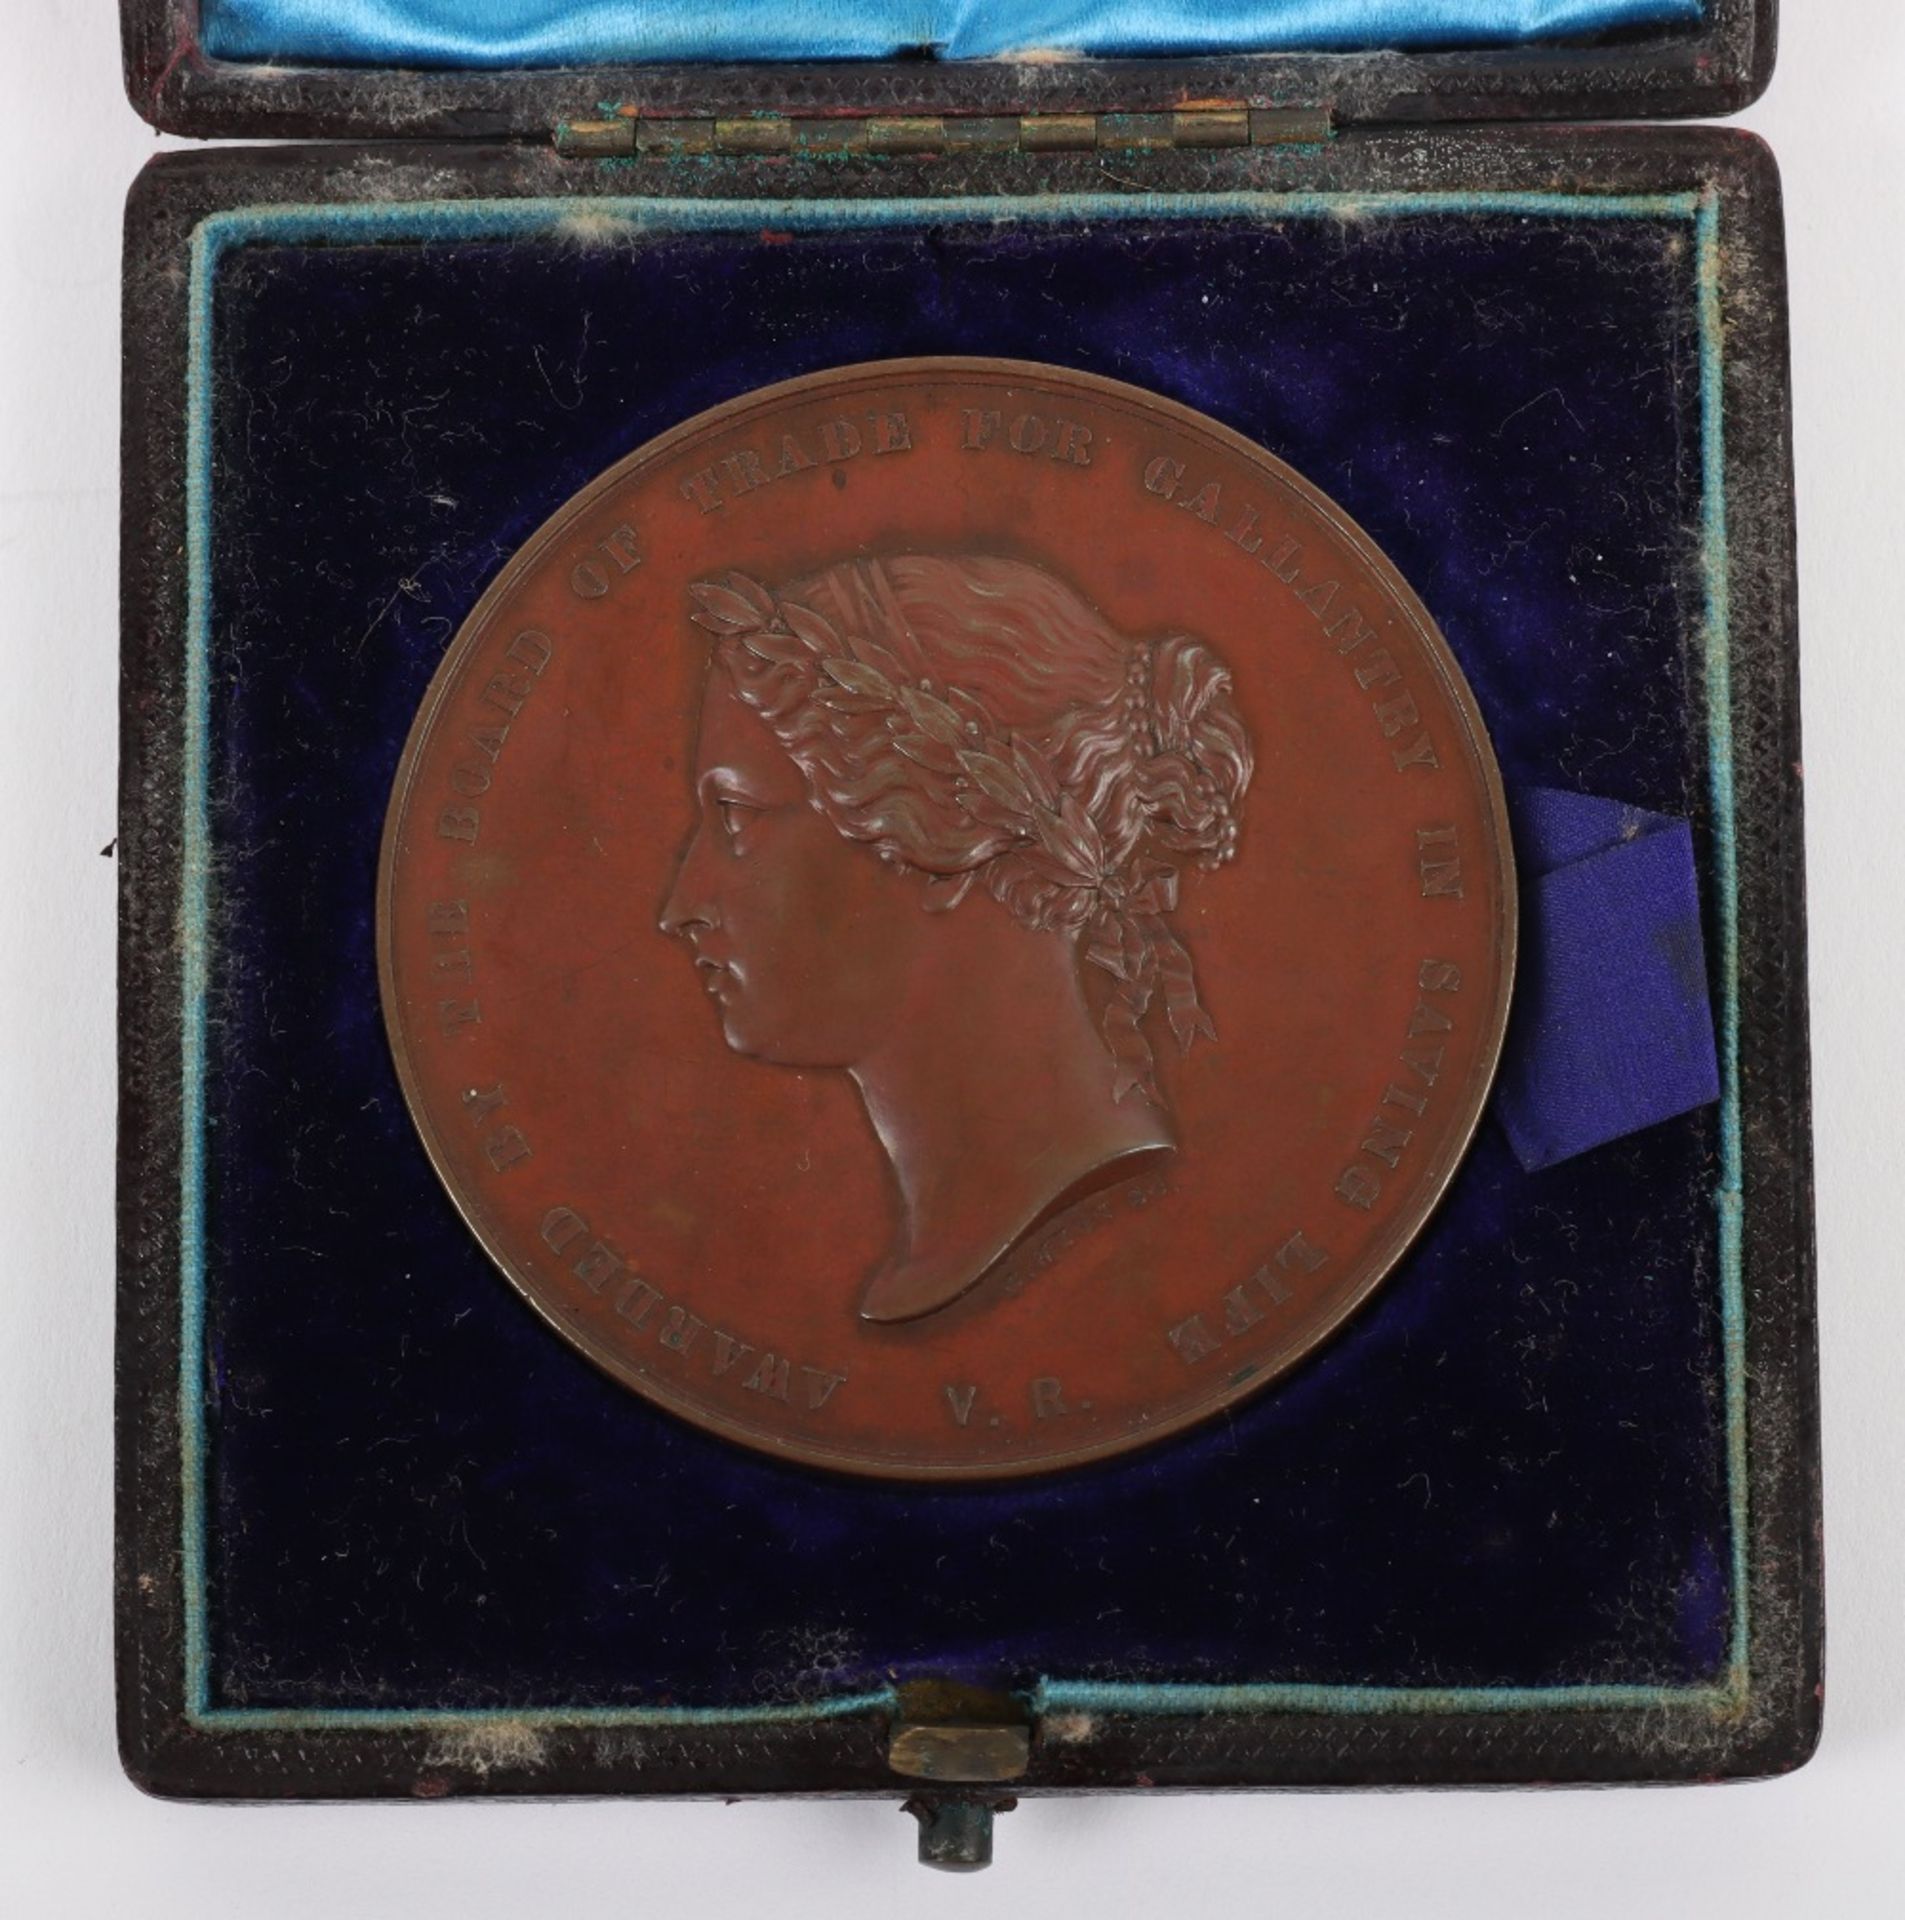 Board of Trade Medal for Gallantry in Saving Life at Sea Awarded to the Master of a Fishing Boat for